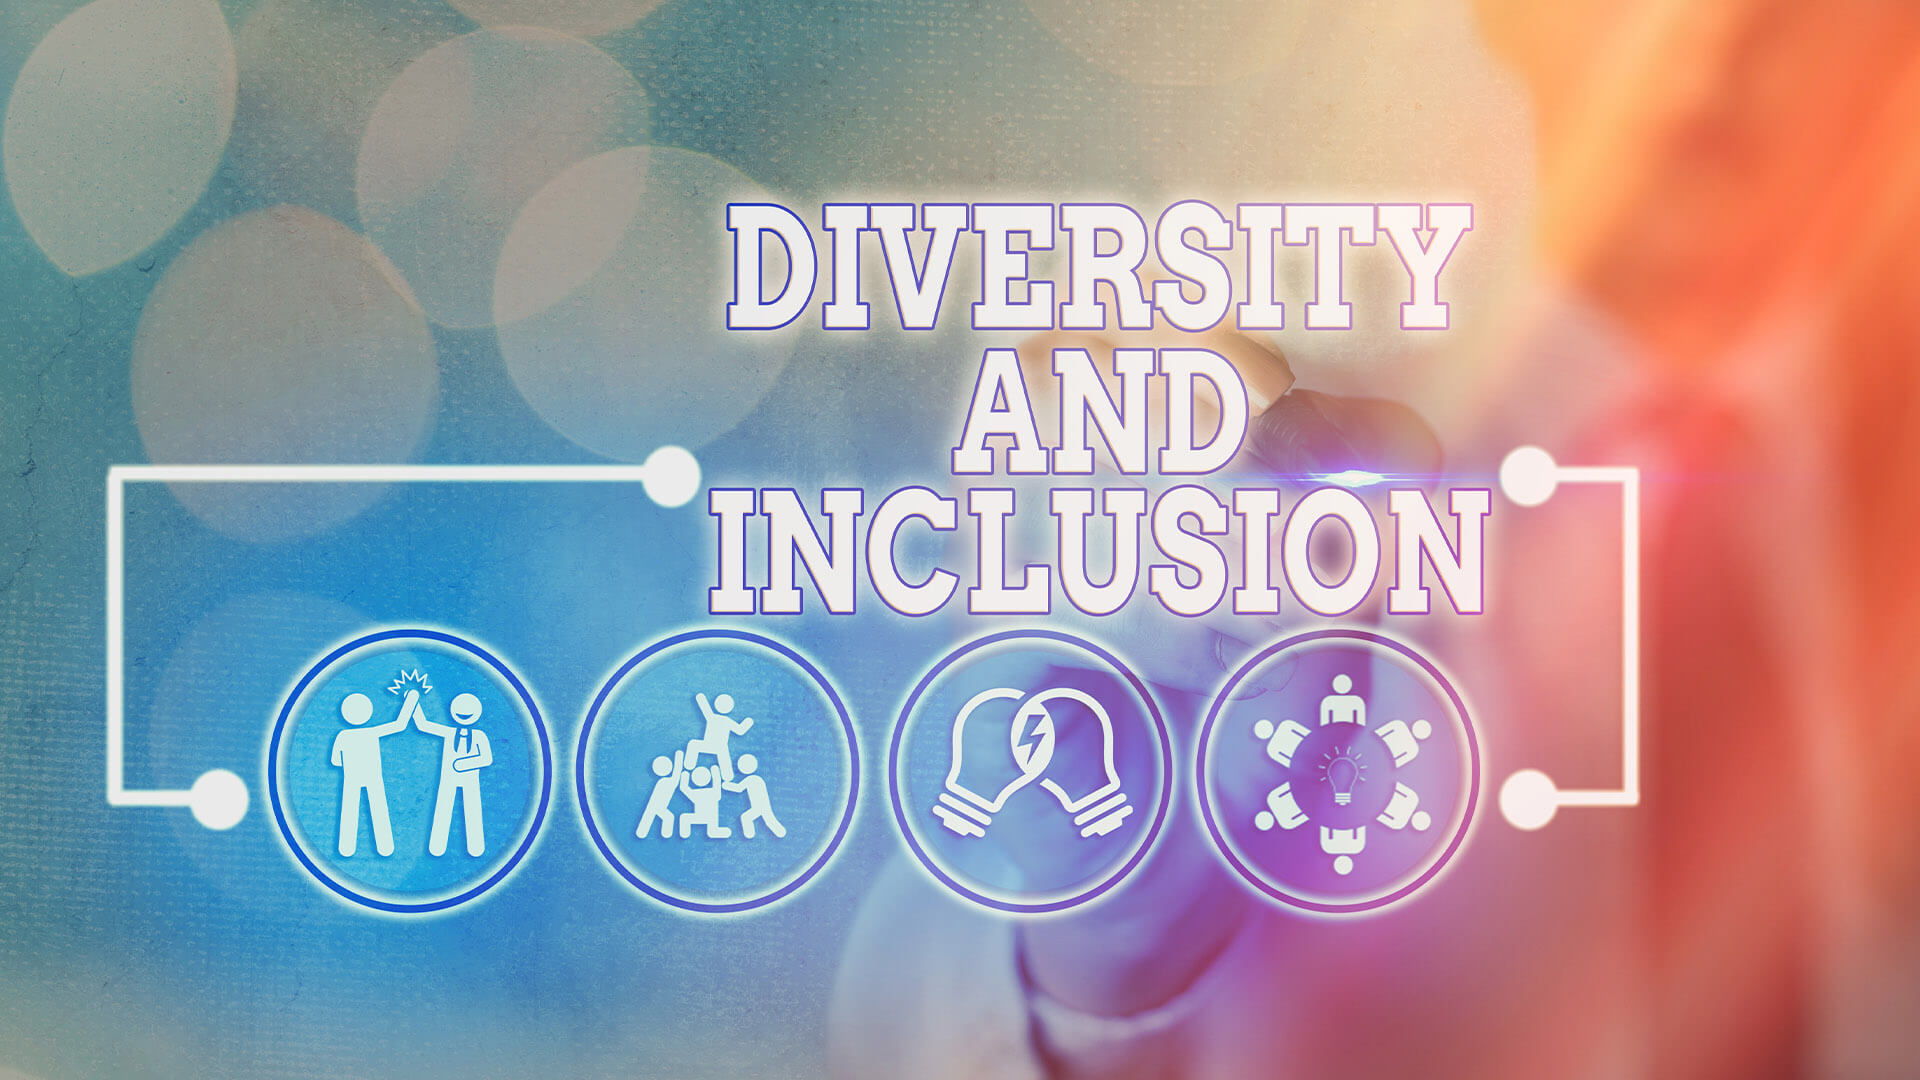 Experts Provide 6 Ways Leaders Can Actively Lift Inclusions Barriers